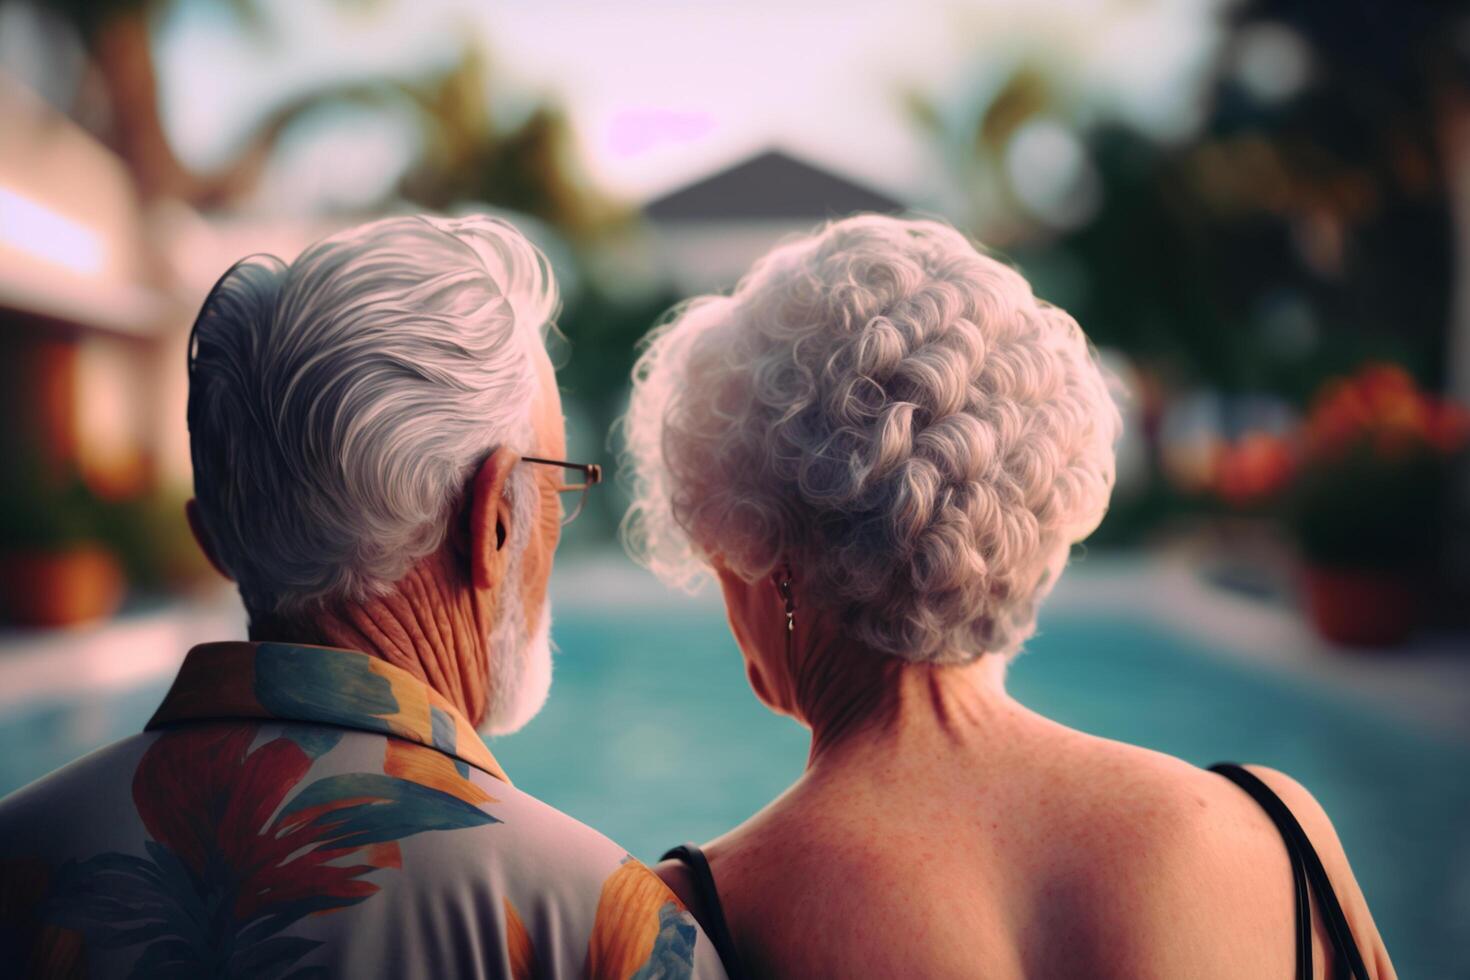 Love and Leisure in Old Age Embracing Dreams on Vacation by the Pool AI generated photo